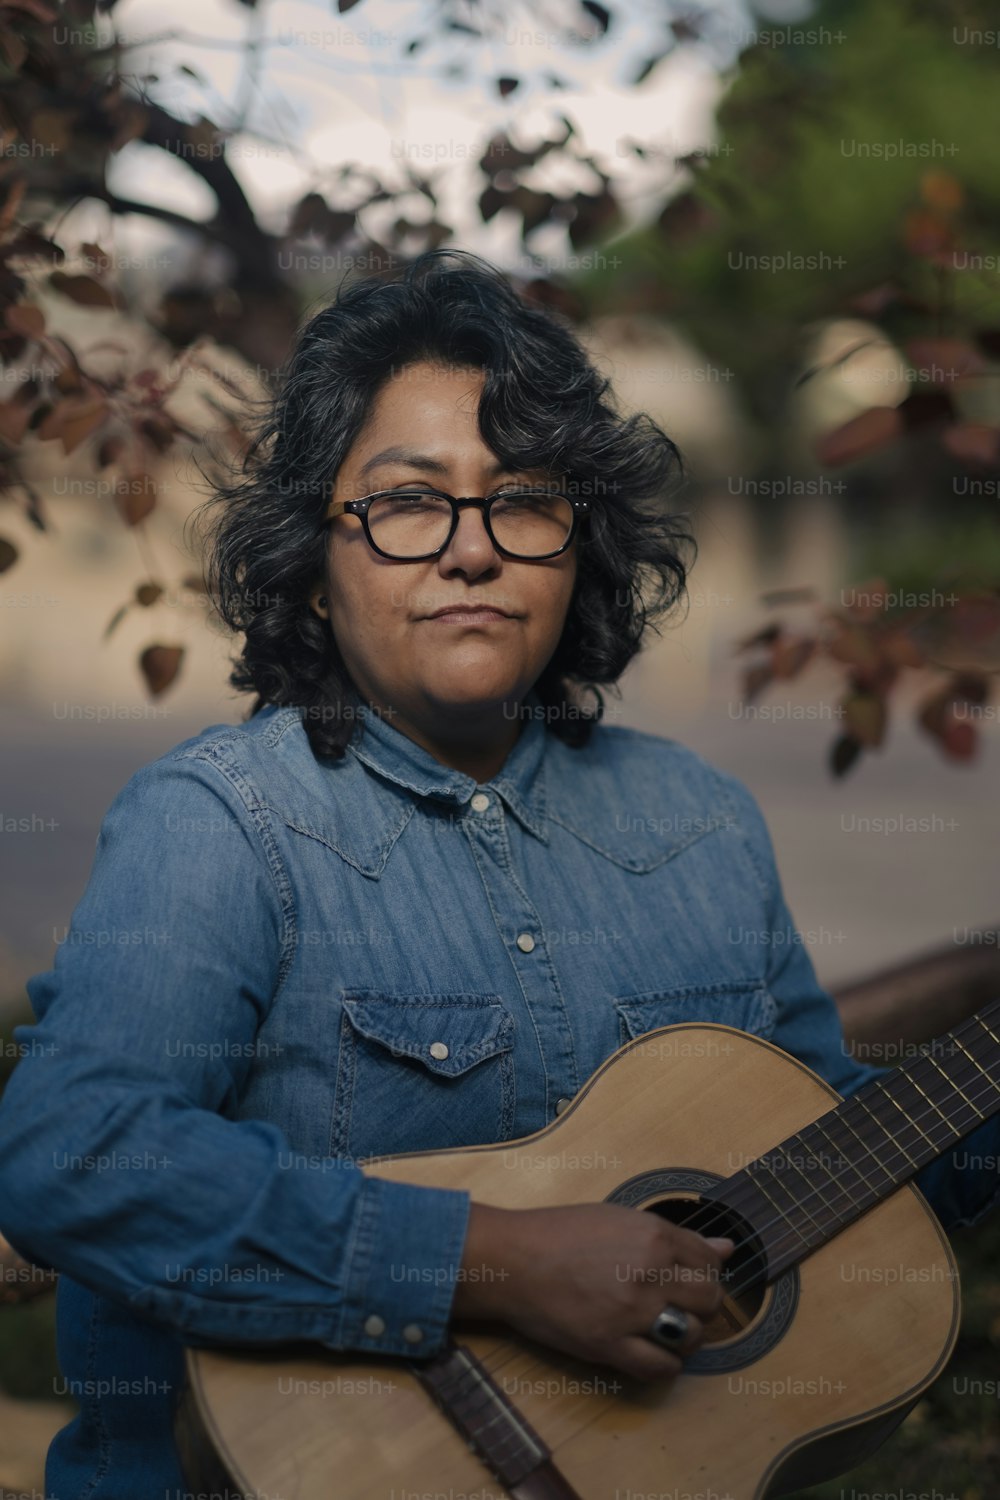 a woman with glasses is holding a guitar